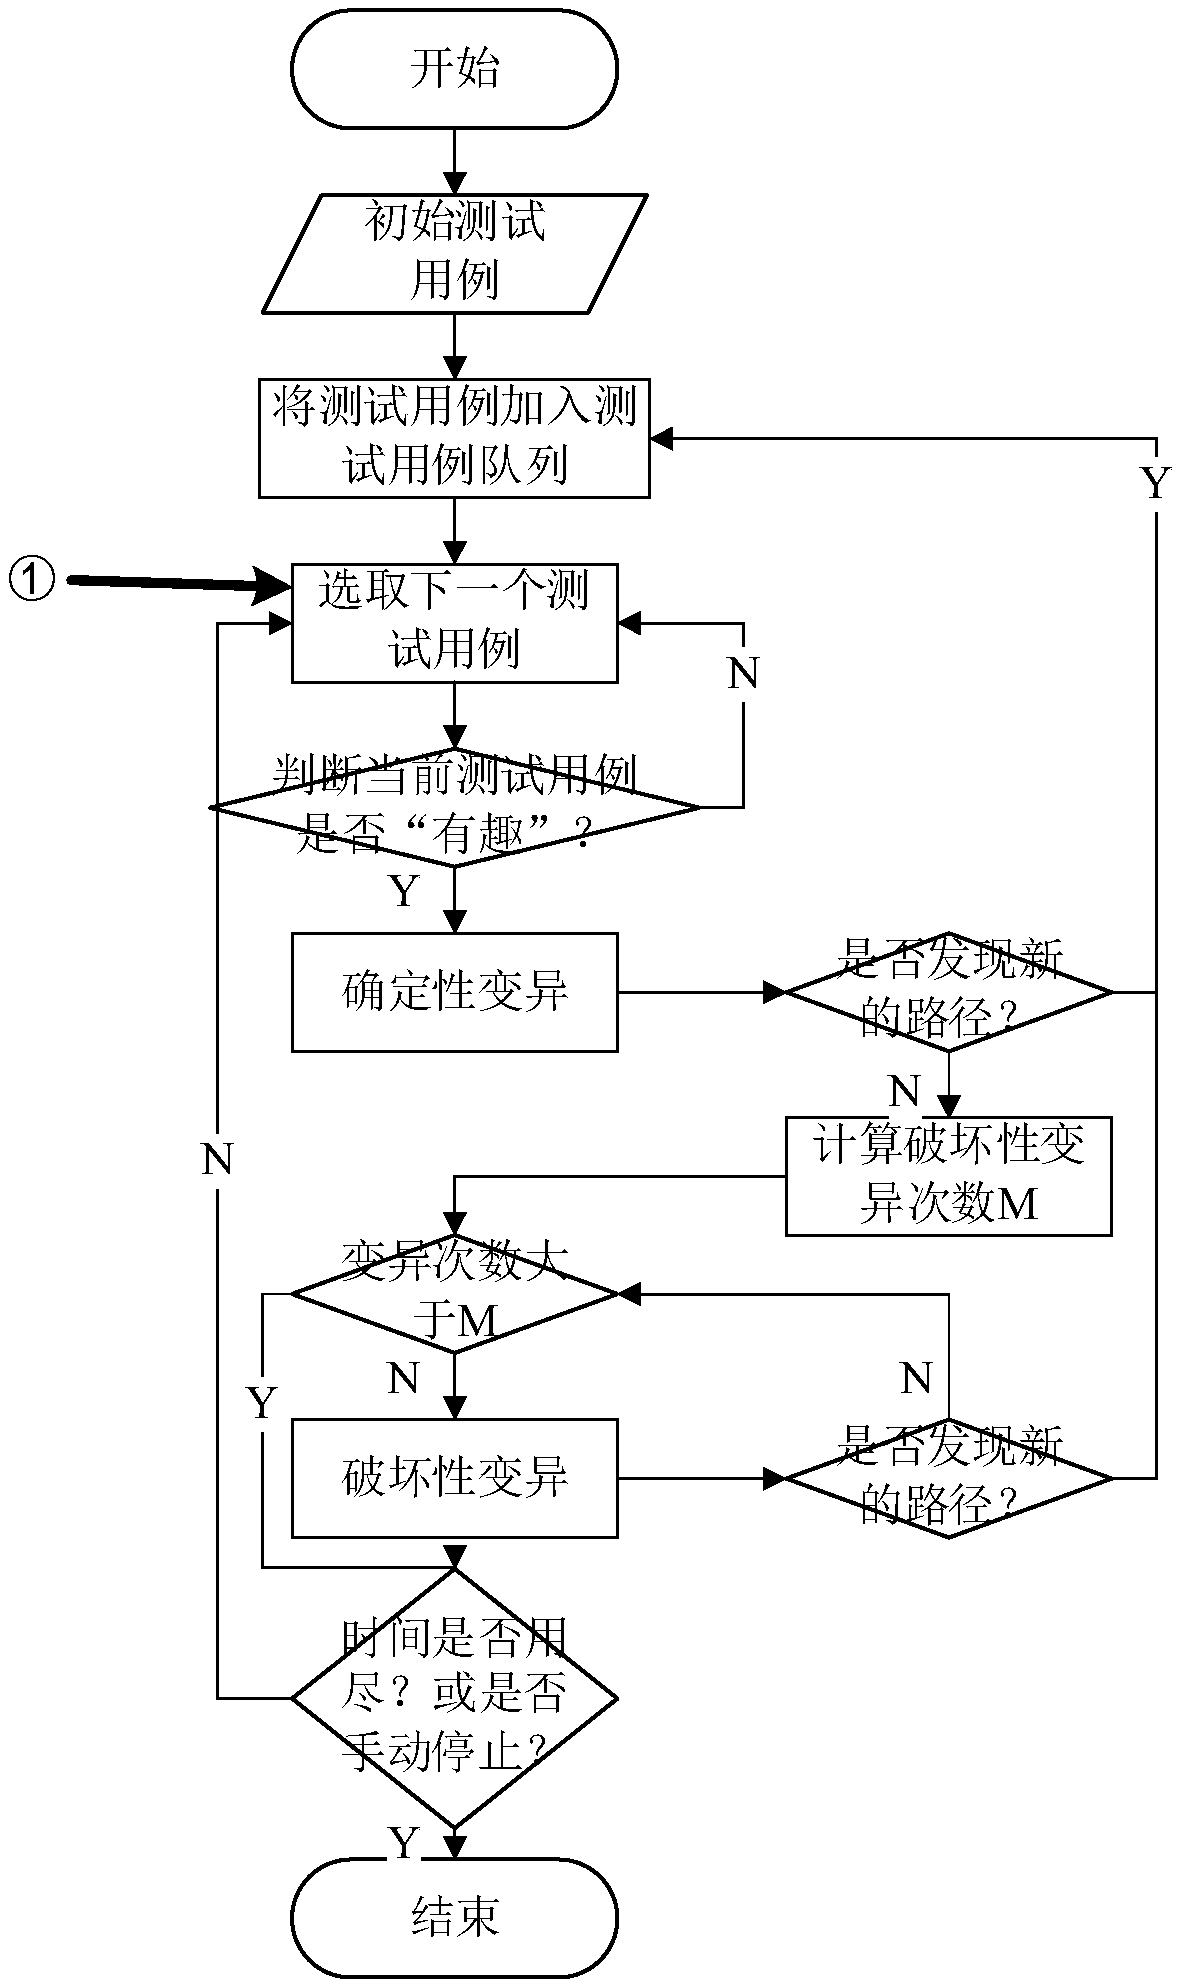 Method and apparatus for selecting fuzzy test case